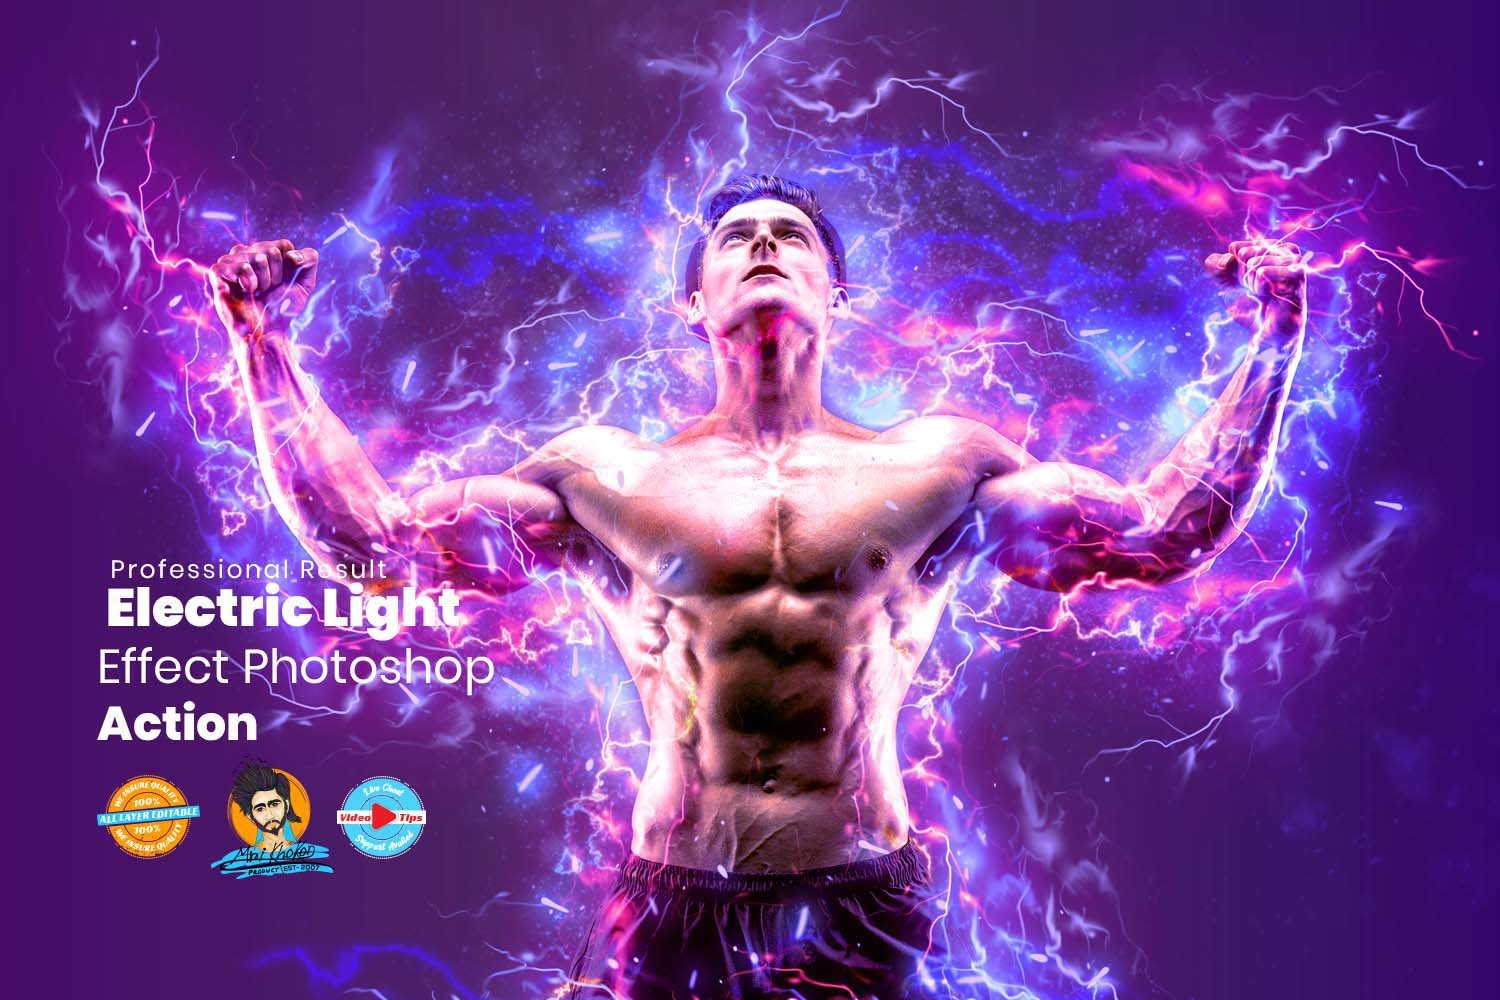 Electric Effect Photoshop Actioncover image.